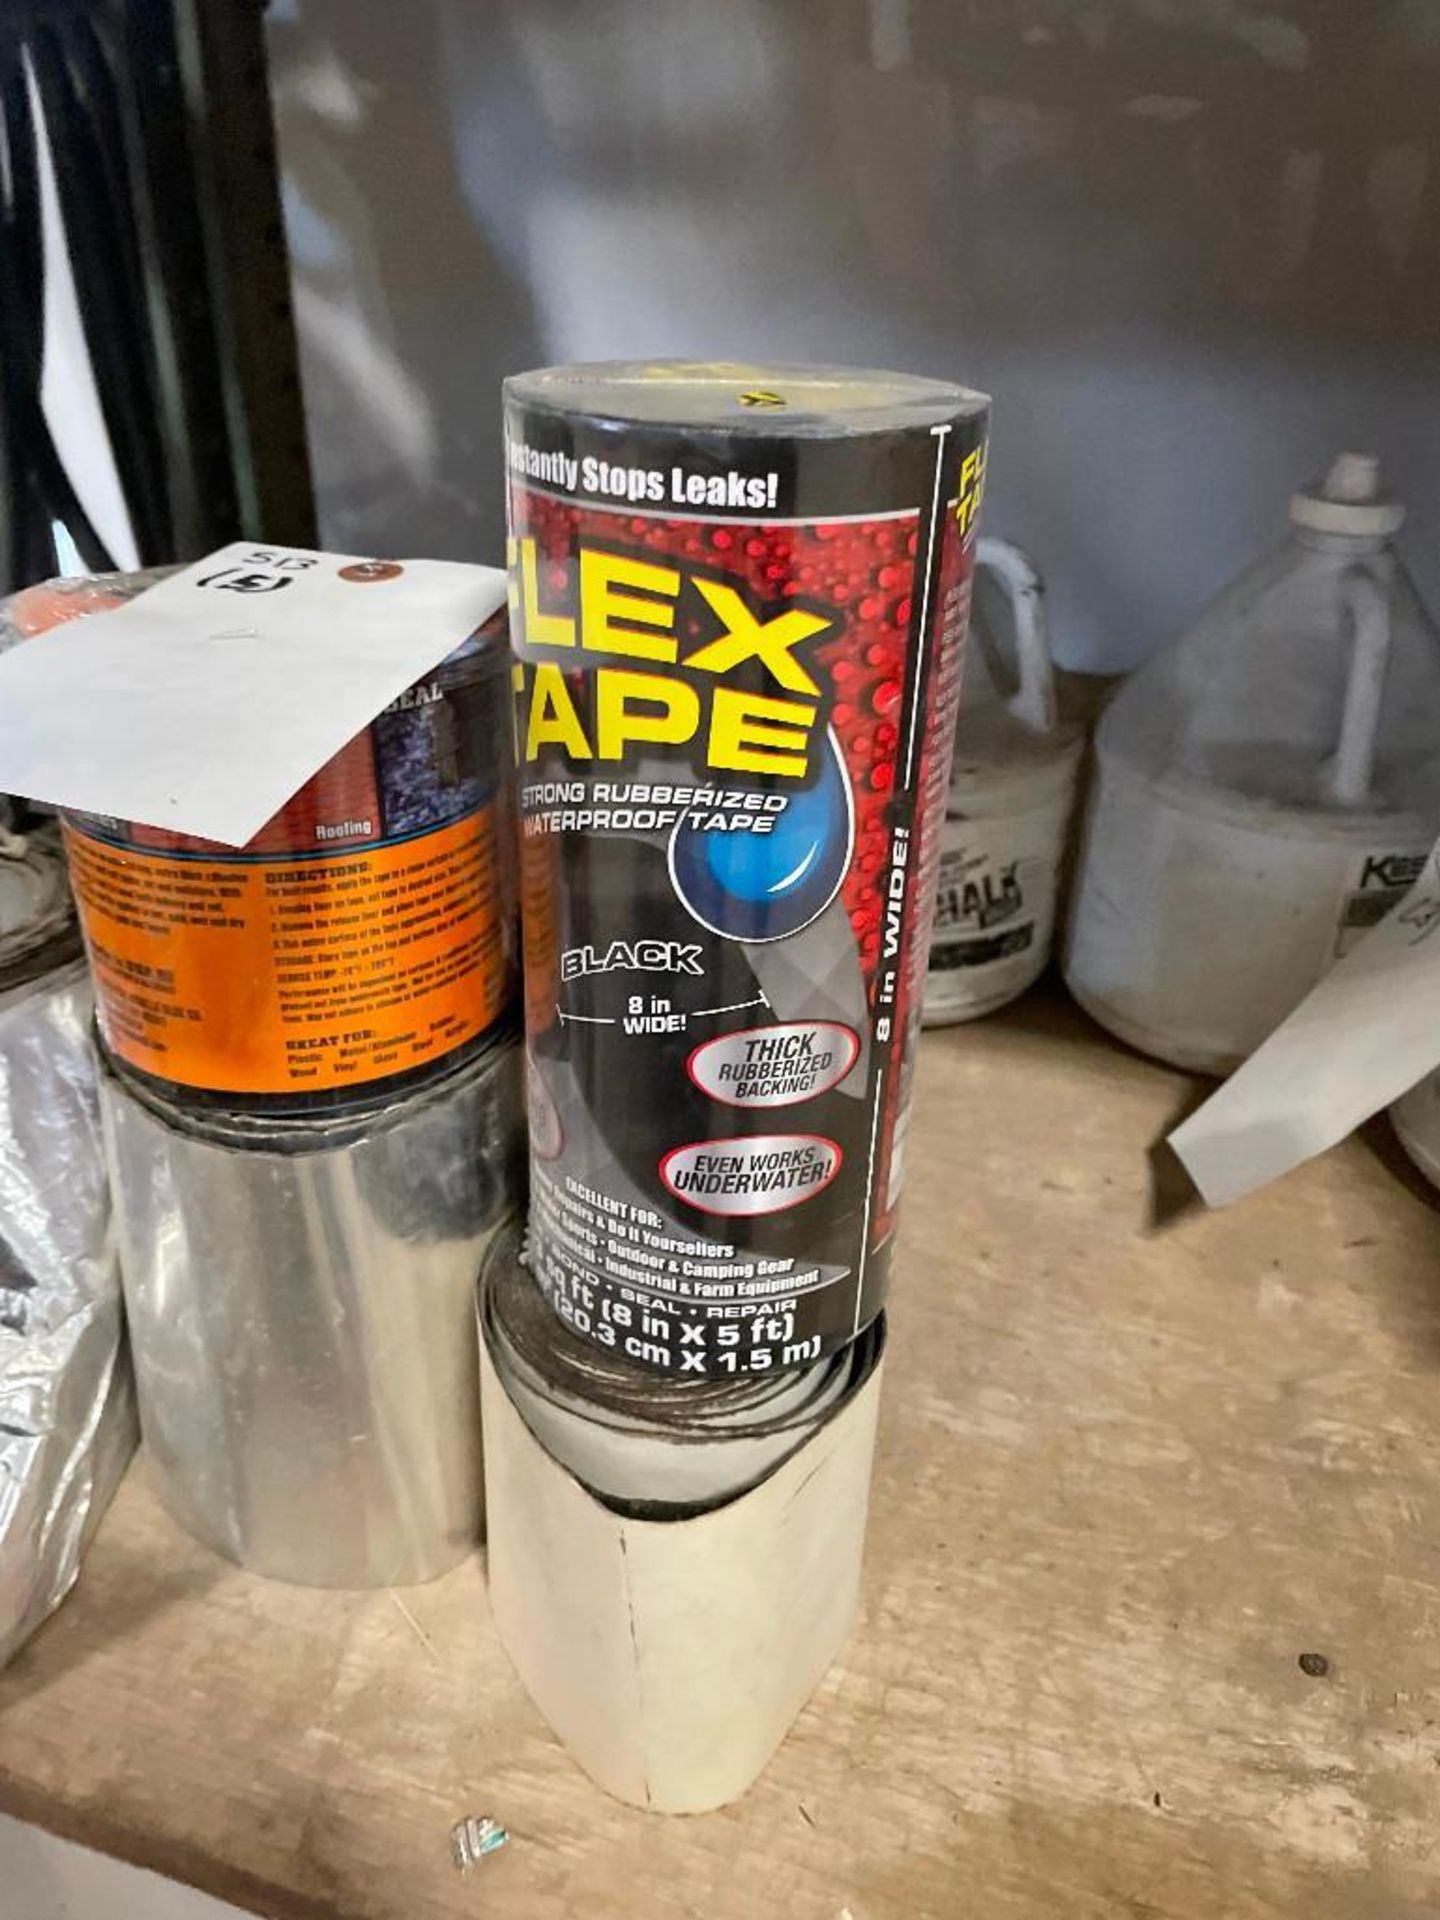 Flex Tape, Gorilla Waterproof Patch & Seal Tape & Miscellaneous Tape. Located in Hazelwood, MO - Image 2 of 4